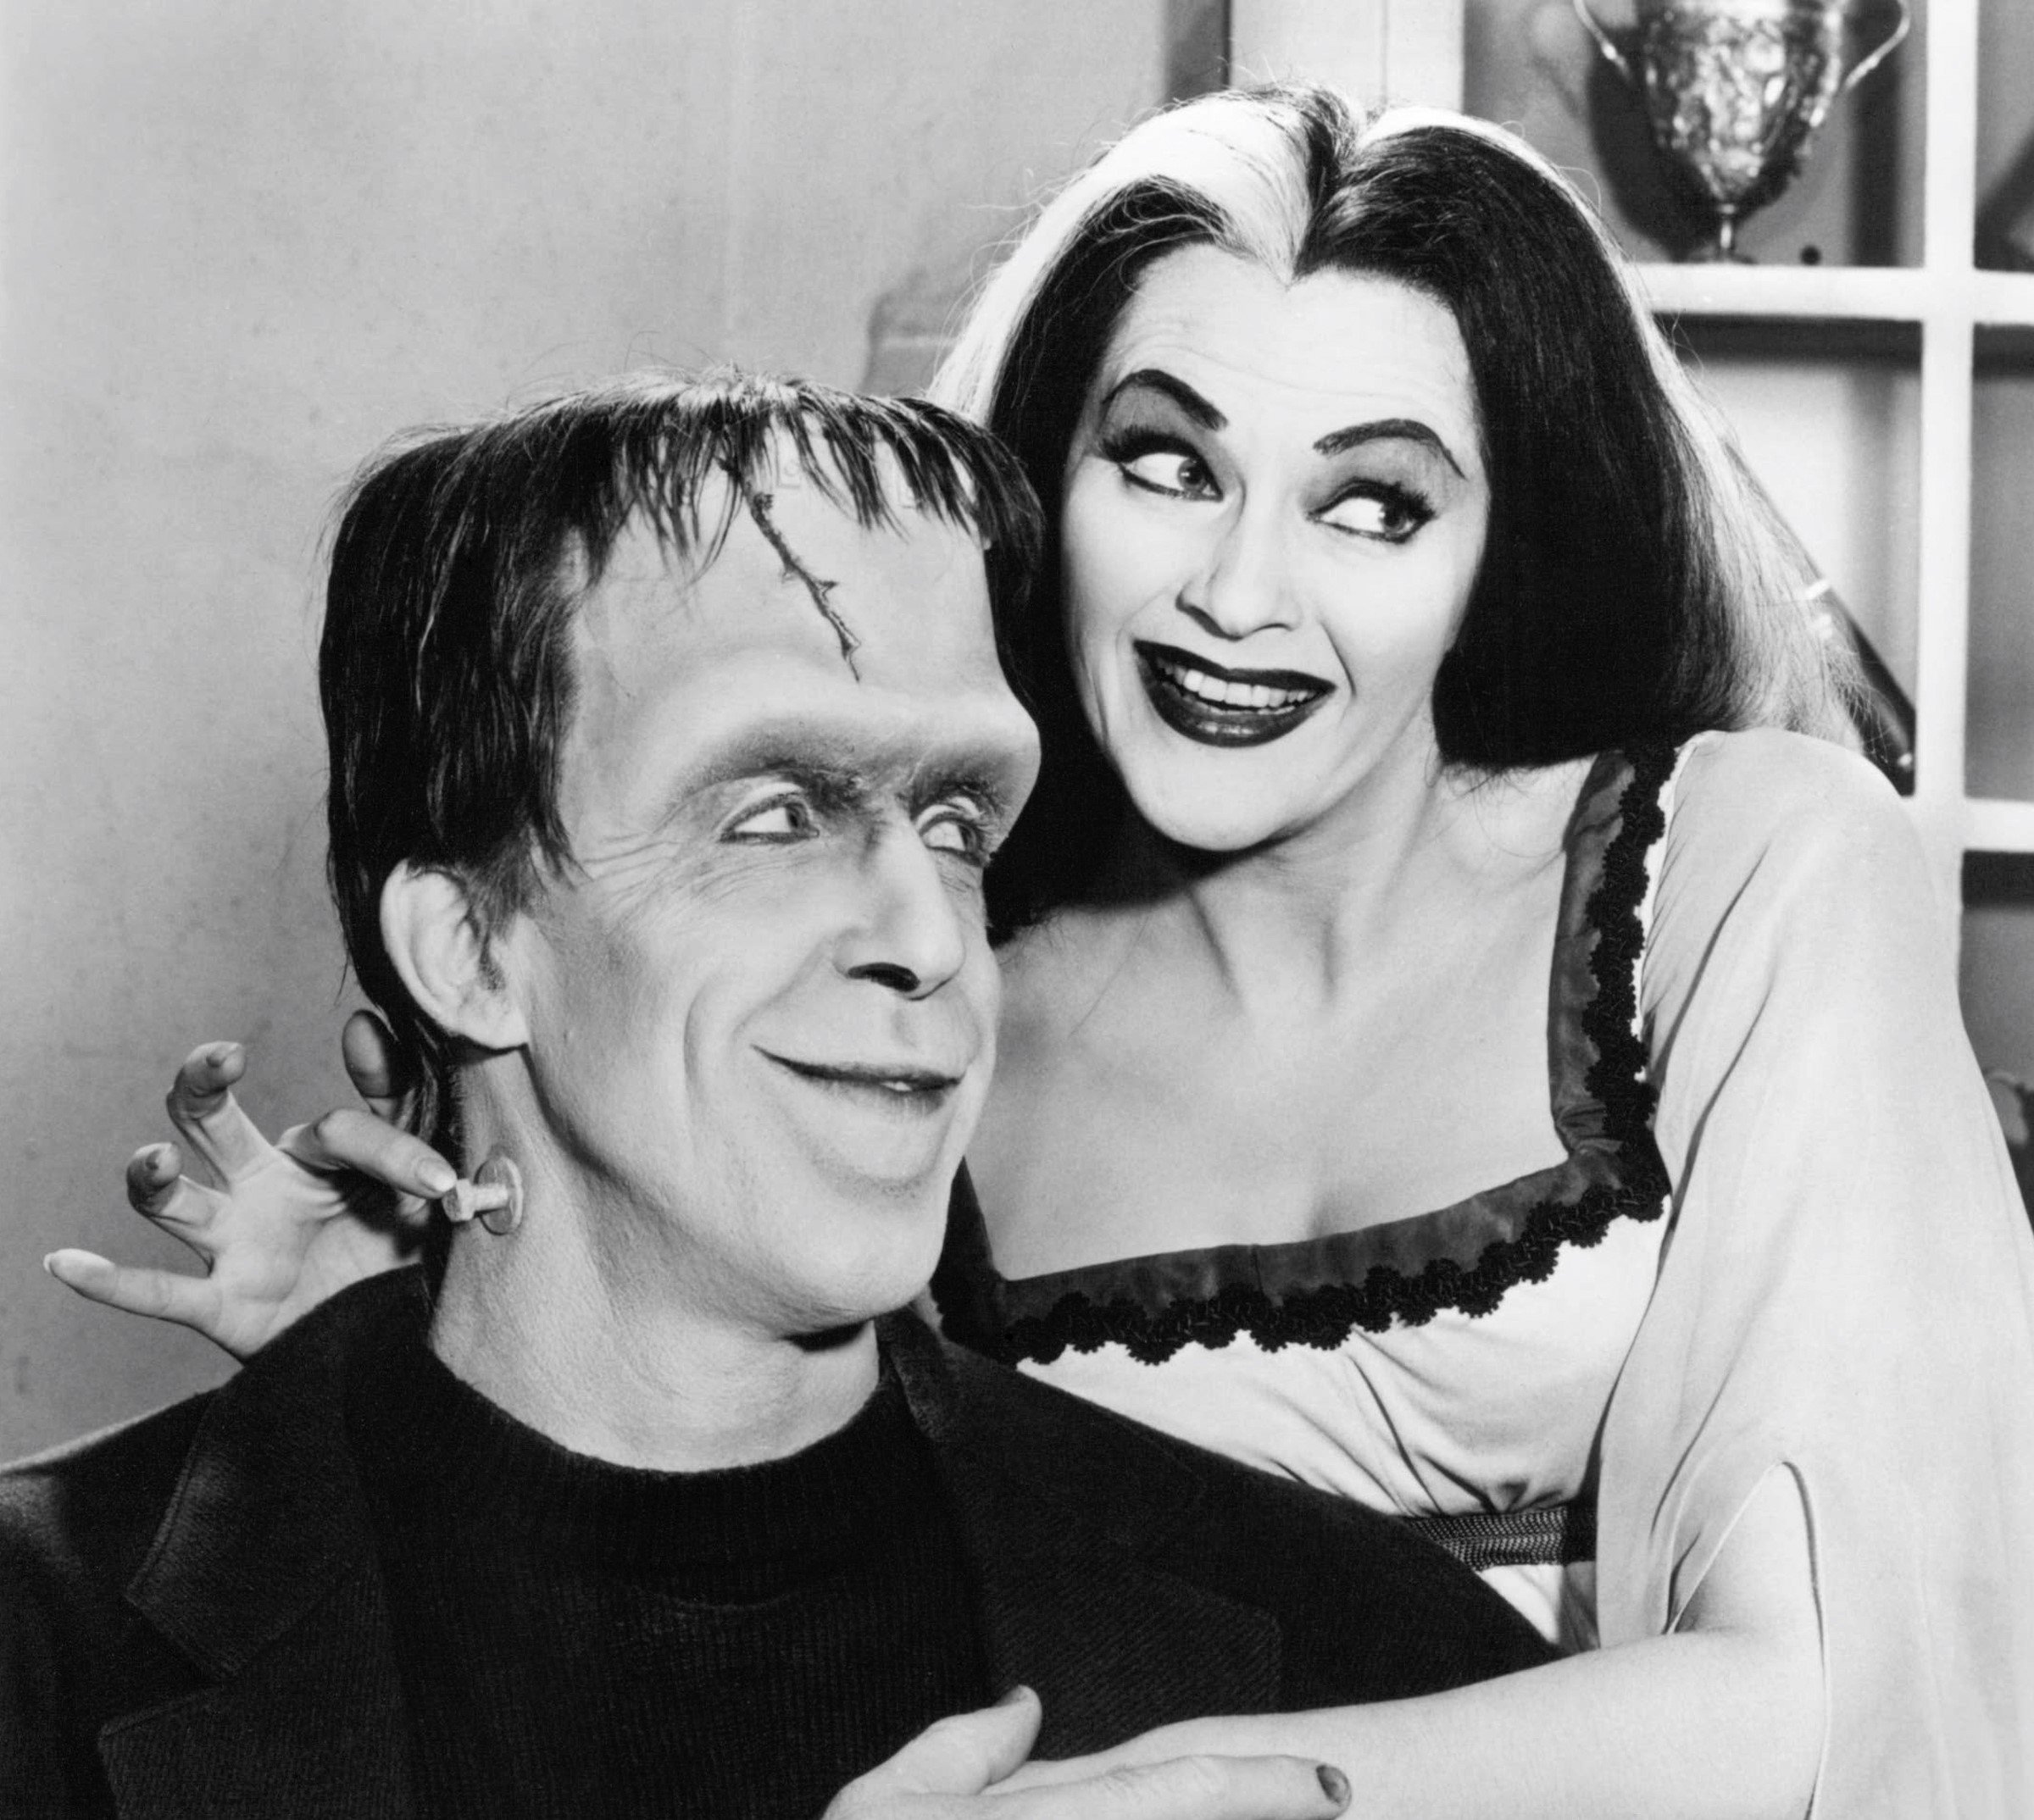 Herman and Lily Munster from 'The Munsters' in front of a cabinet